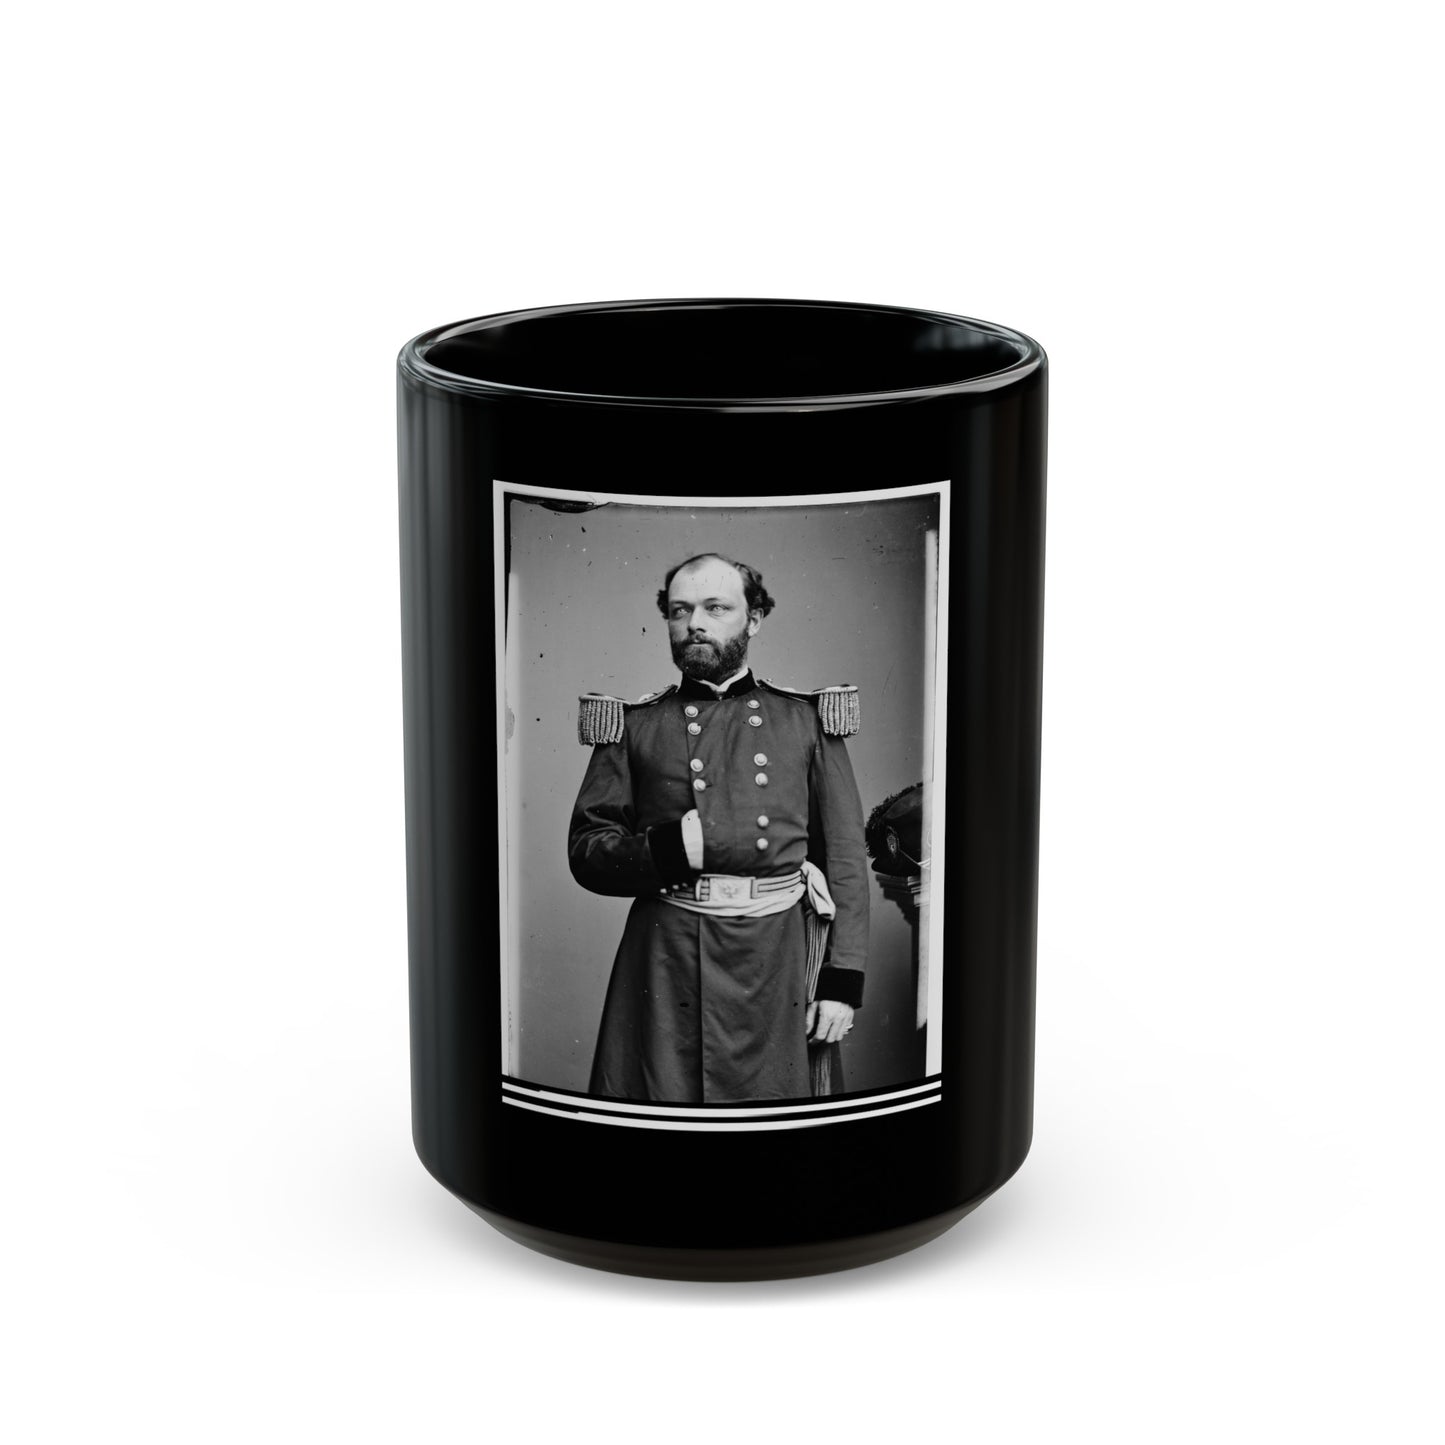 Portrait Of Capt. Quincy A. Gillmore, Officer Of The Federal Army (Maj. Gen. From July 10, 1863) (U.S. Civil War) Black Coffee Mug